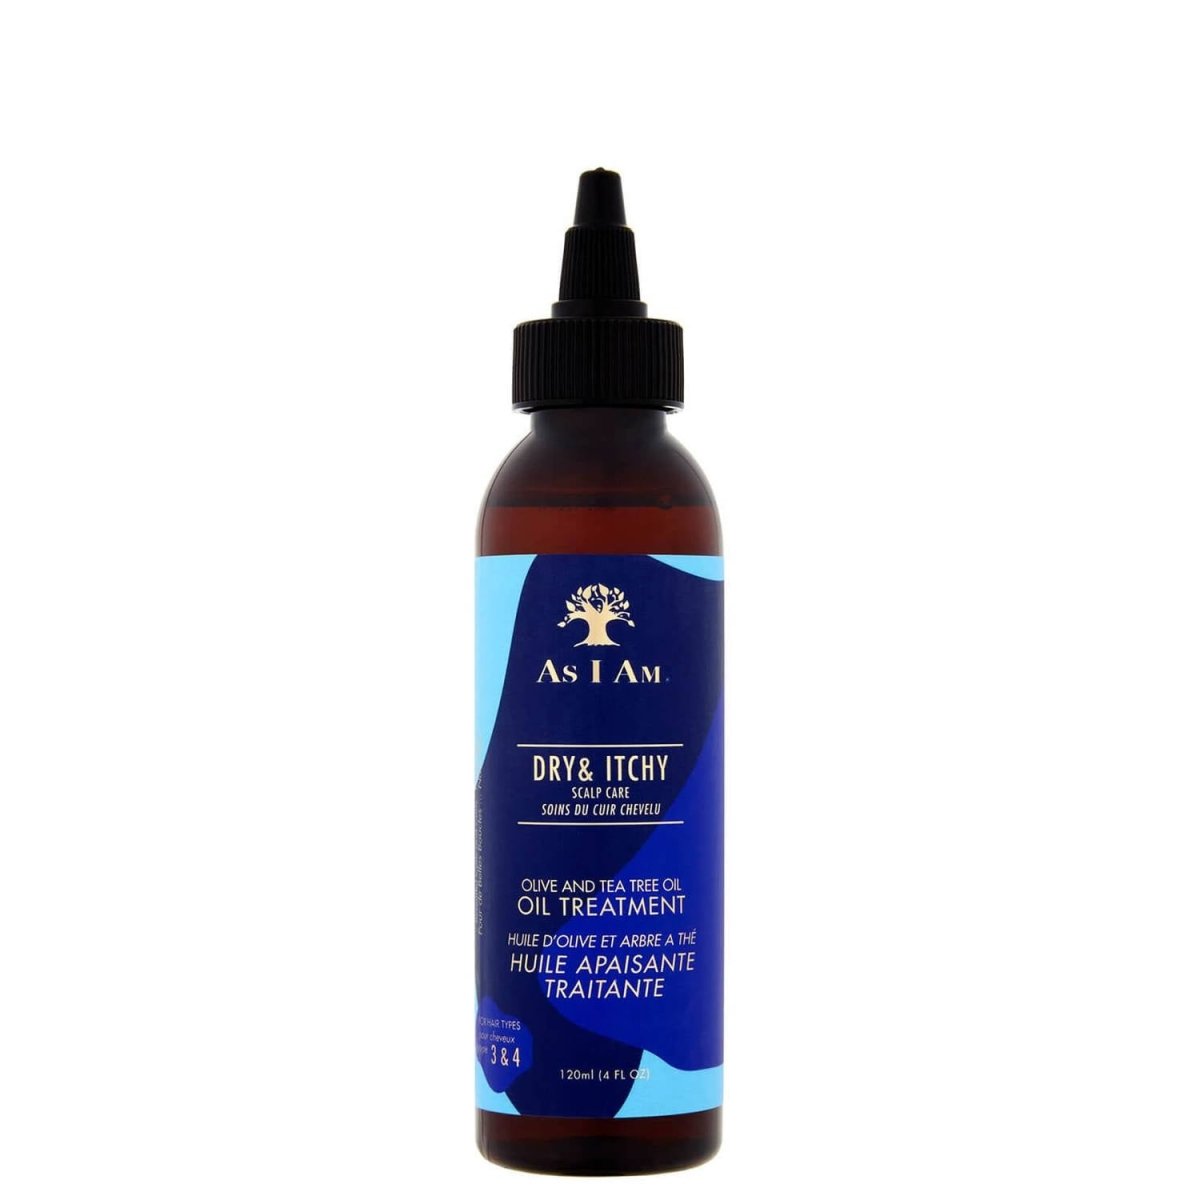 As I Am Dry and Itchy Scalp Care Olive and Tea Tree Oil Treatment - Southwestsix Cosmetics As I Am Dry and Itchy Scalp Care Olive and Tea Tree Oil Treatment Scalp Oil As I Am Southwestsix Cosmetics As I Am Dry and Itchy Scalp Care Olive and Tea Tree Oil Treatment